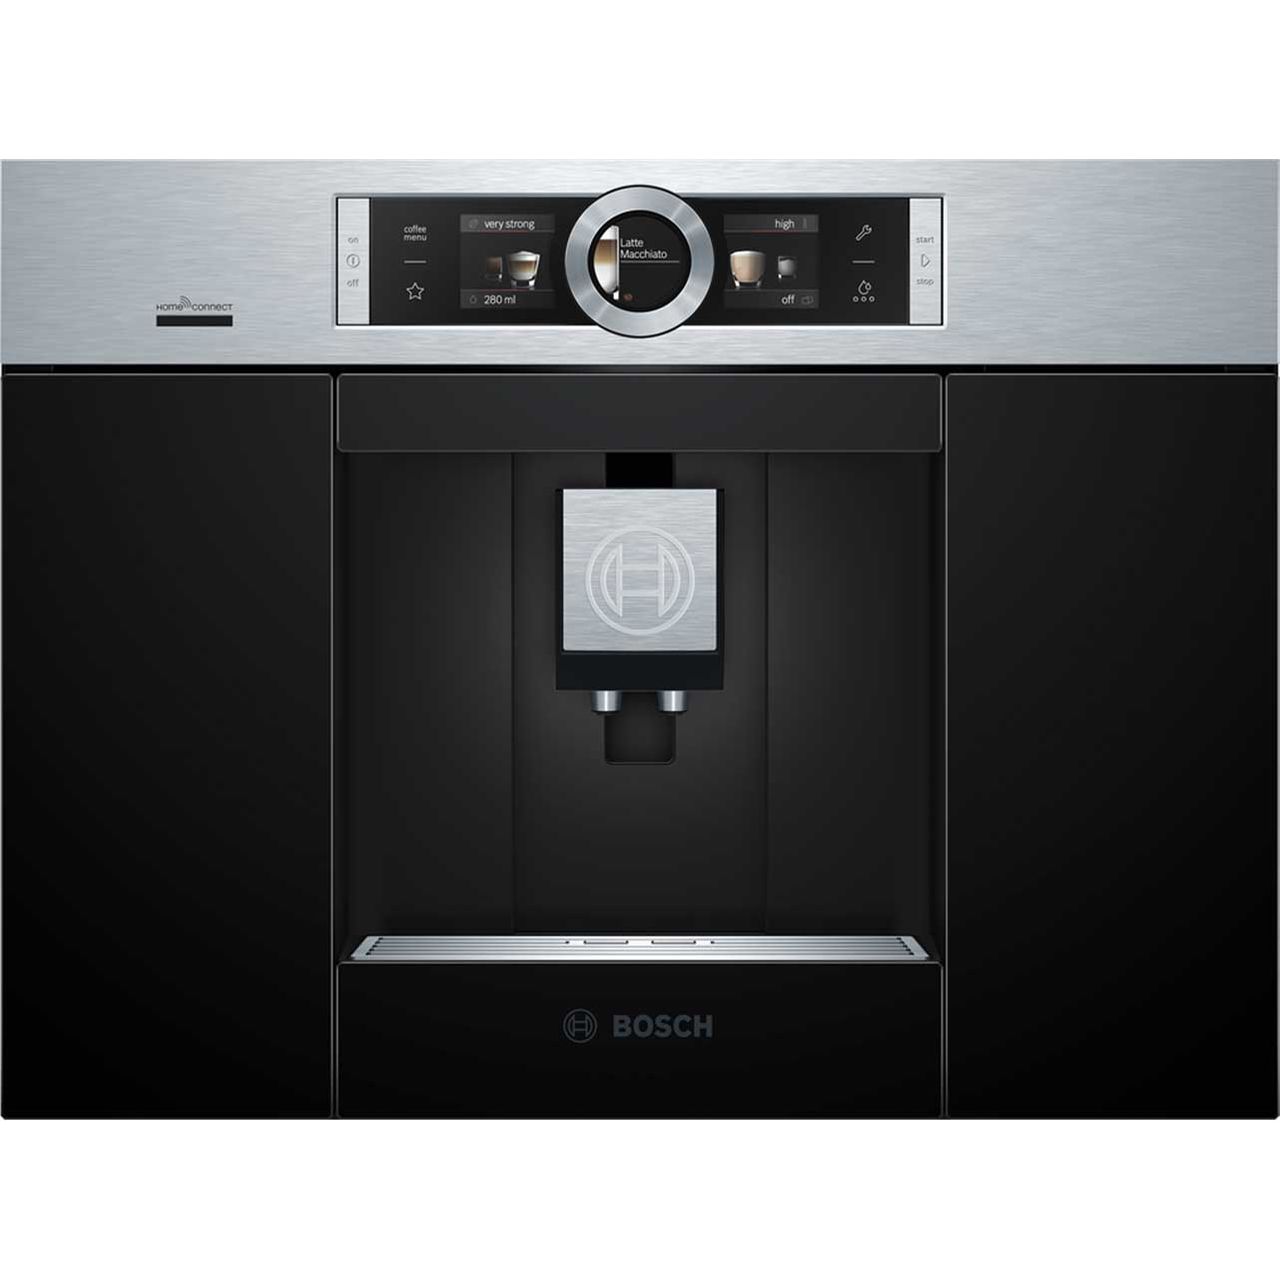 Bosch CTL636ES6 Wifi Connected Built In Bean to Cup Coffee Machine Review